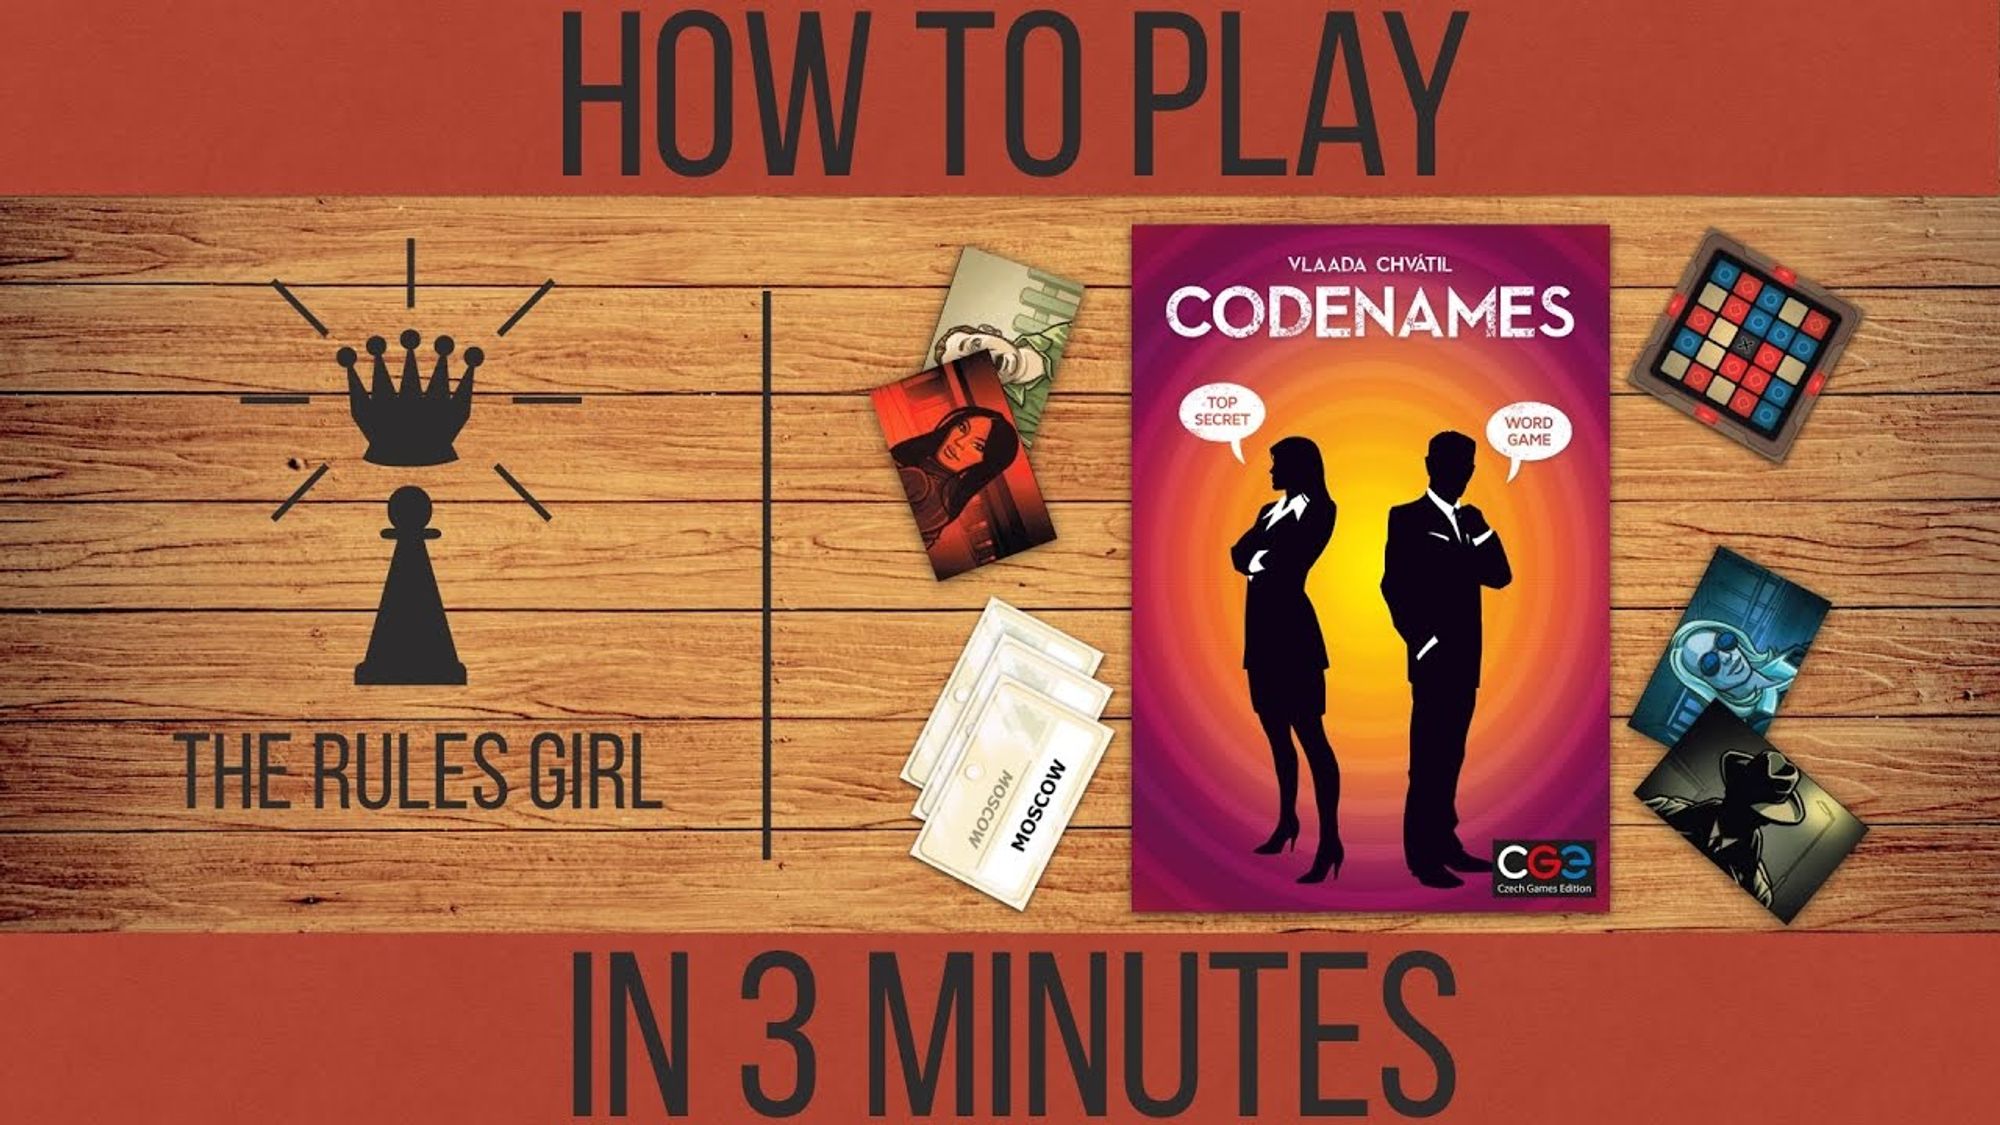 How to Play Codenames in 3 Minutes - The Rules Girl